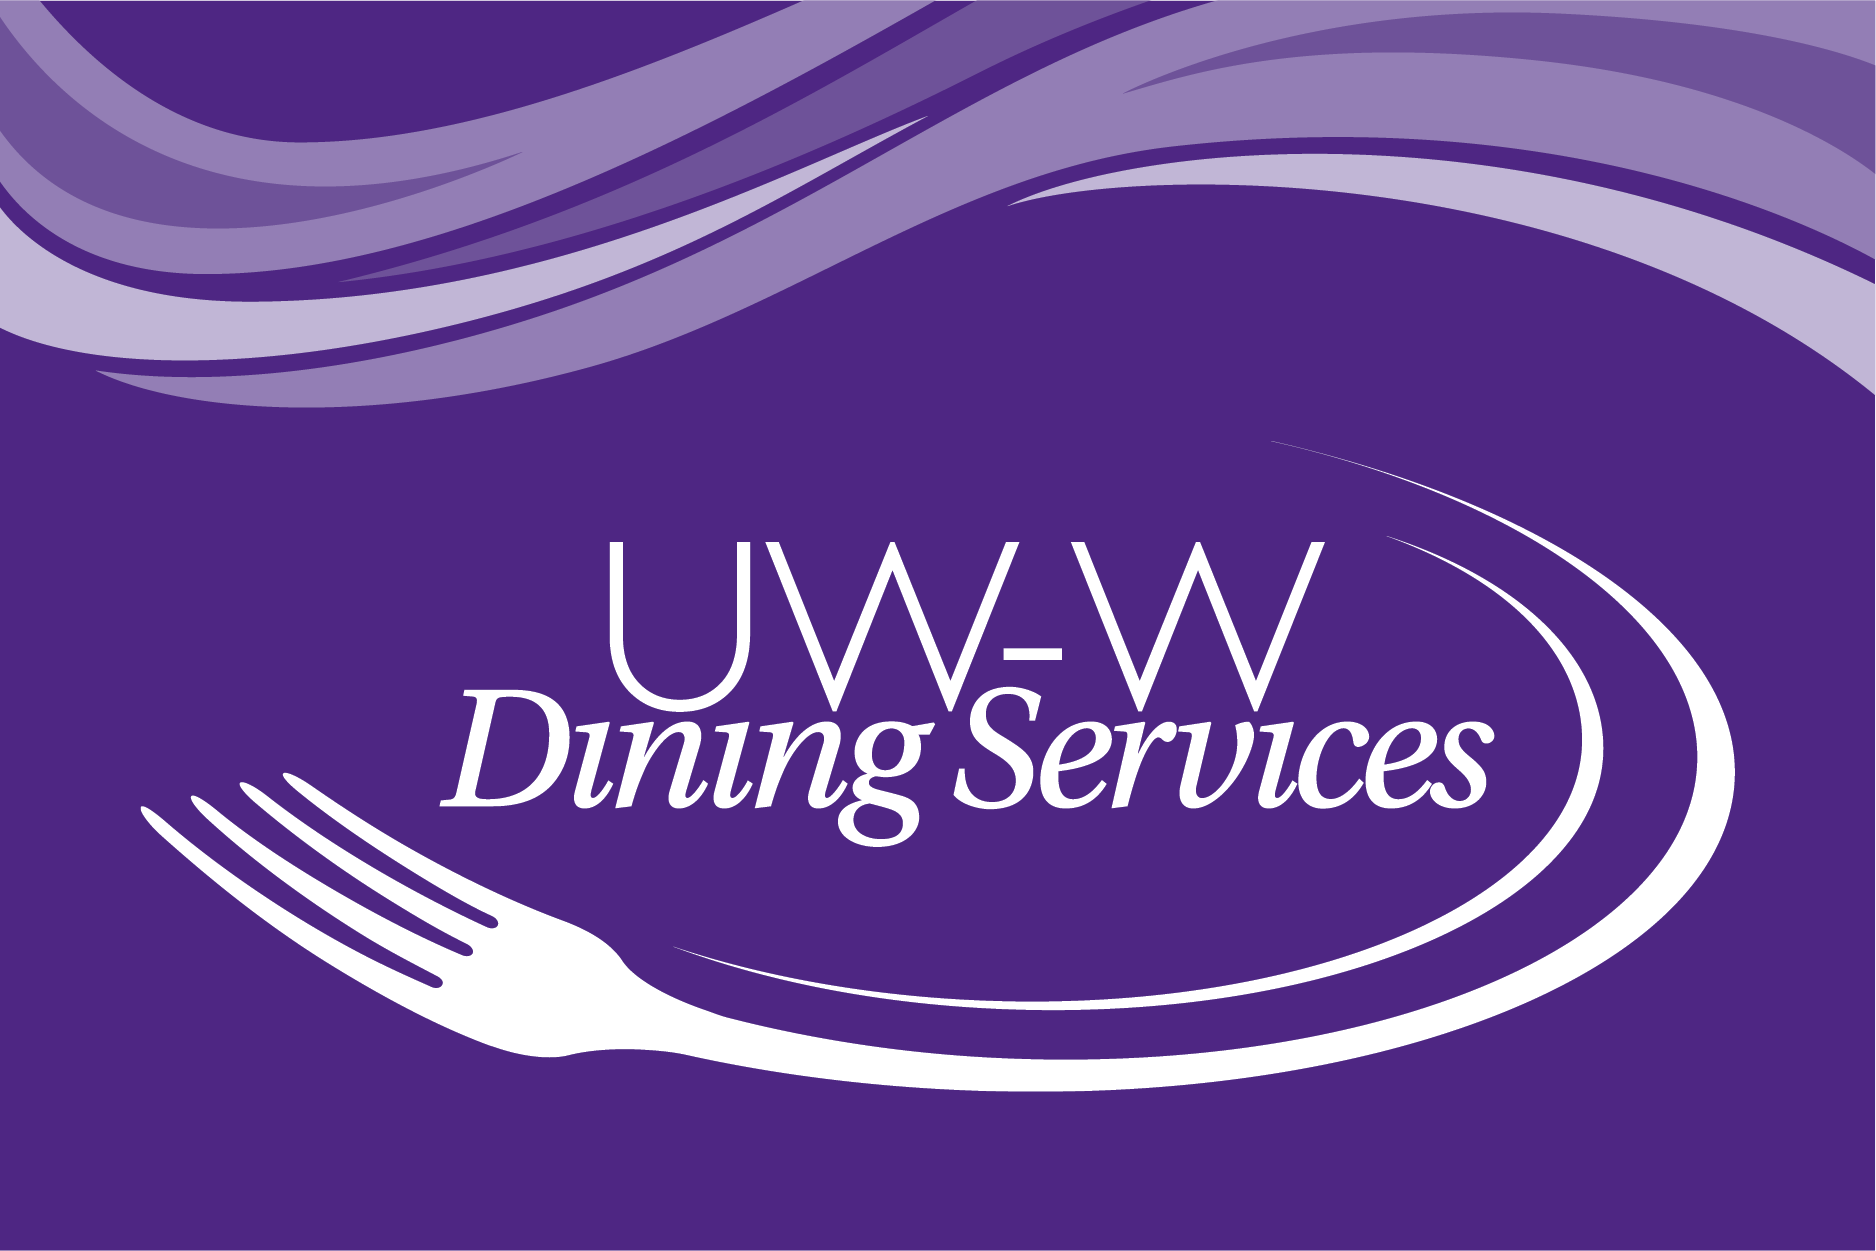 UW-Whitewater Dining Services